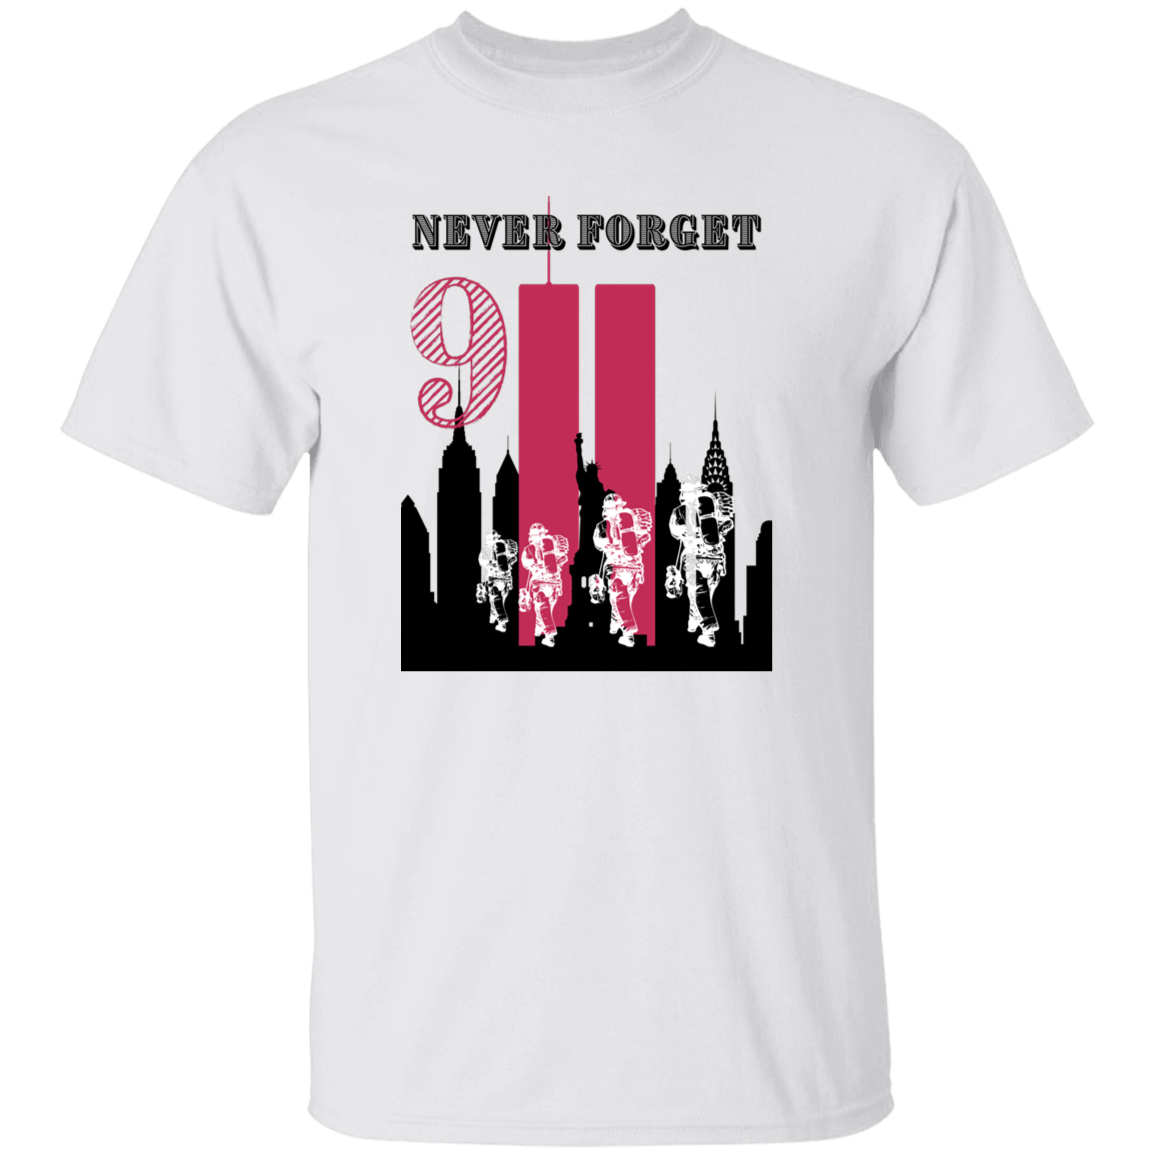 NEVER FORGET YOUTH 5.3 oz 100% Cotton T-Shirt